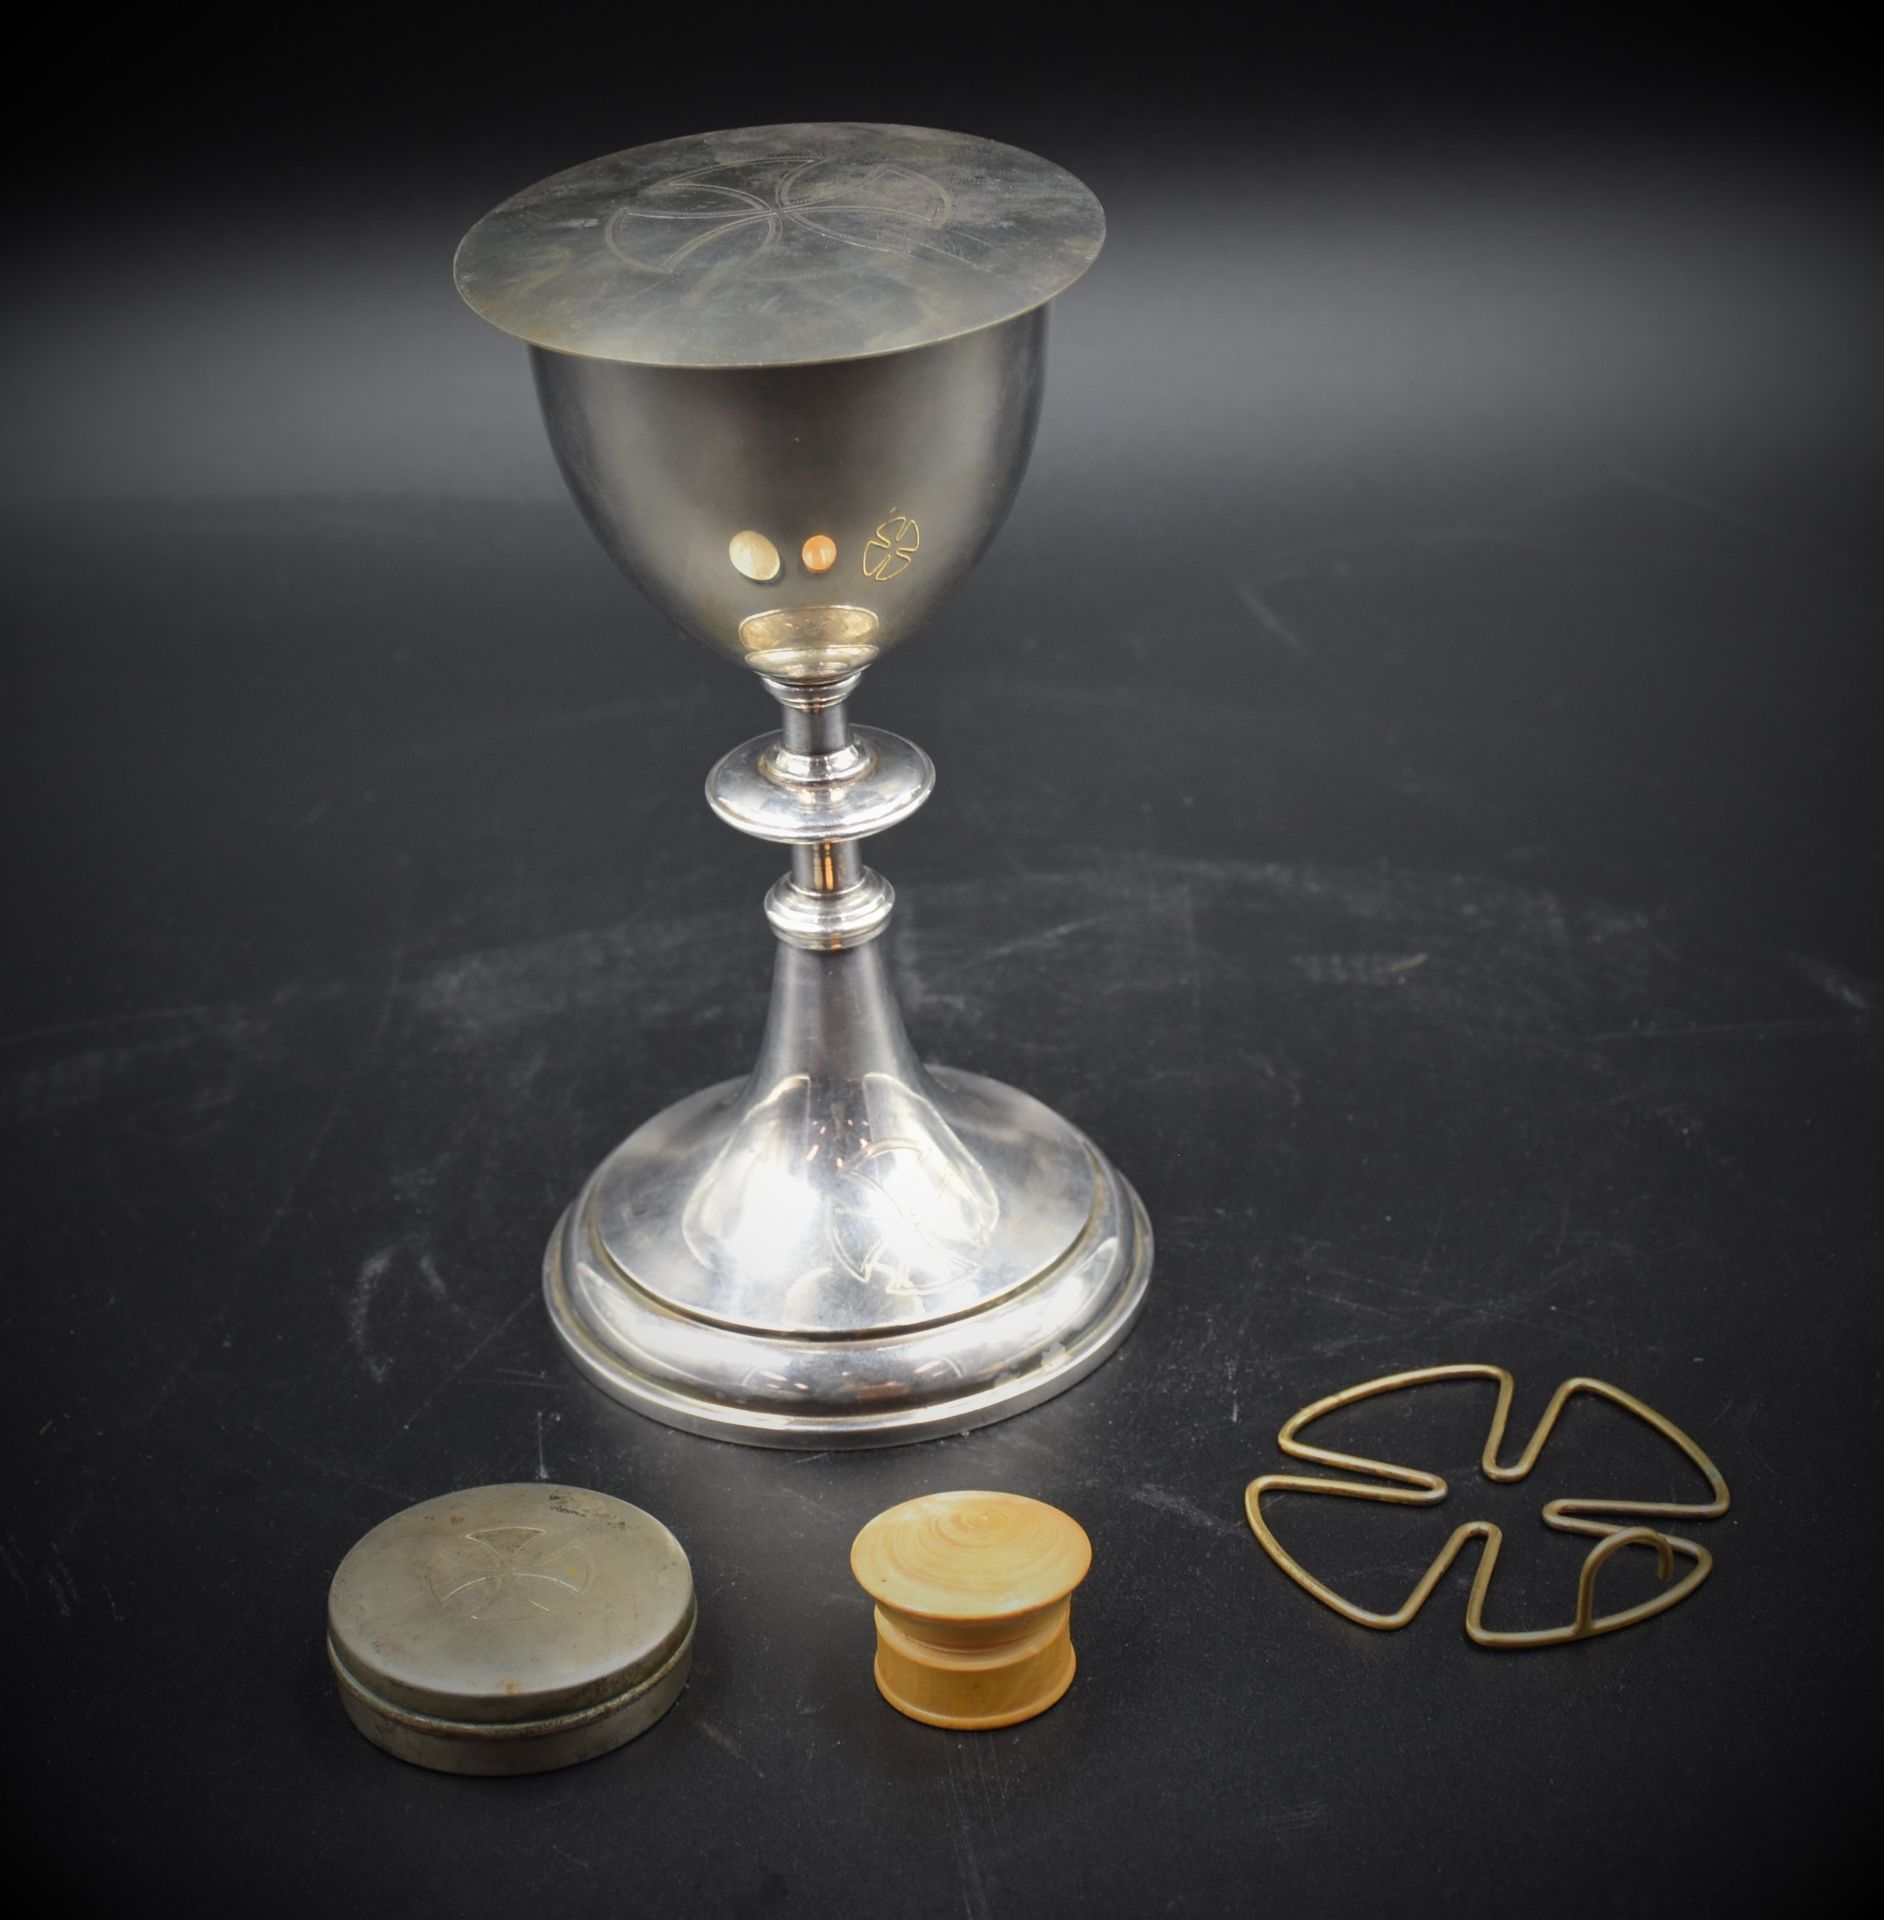 Silver and gilt chalice in its case including also a host box and a small box containing relics. - Image 2 of 3